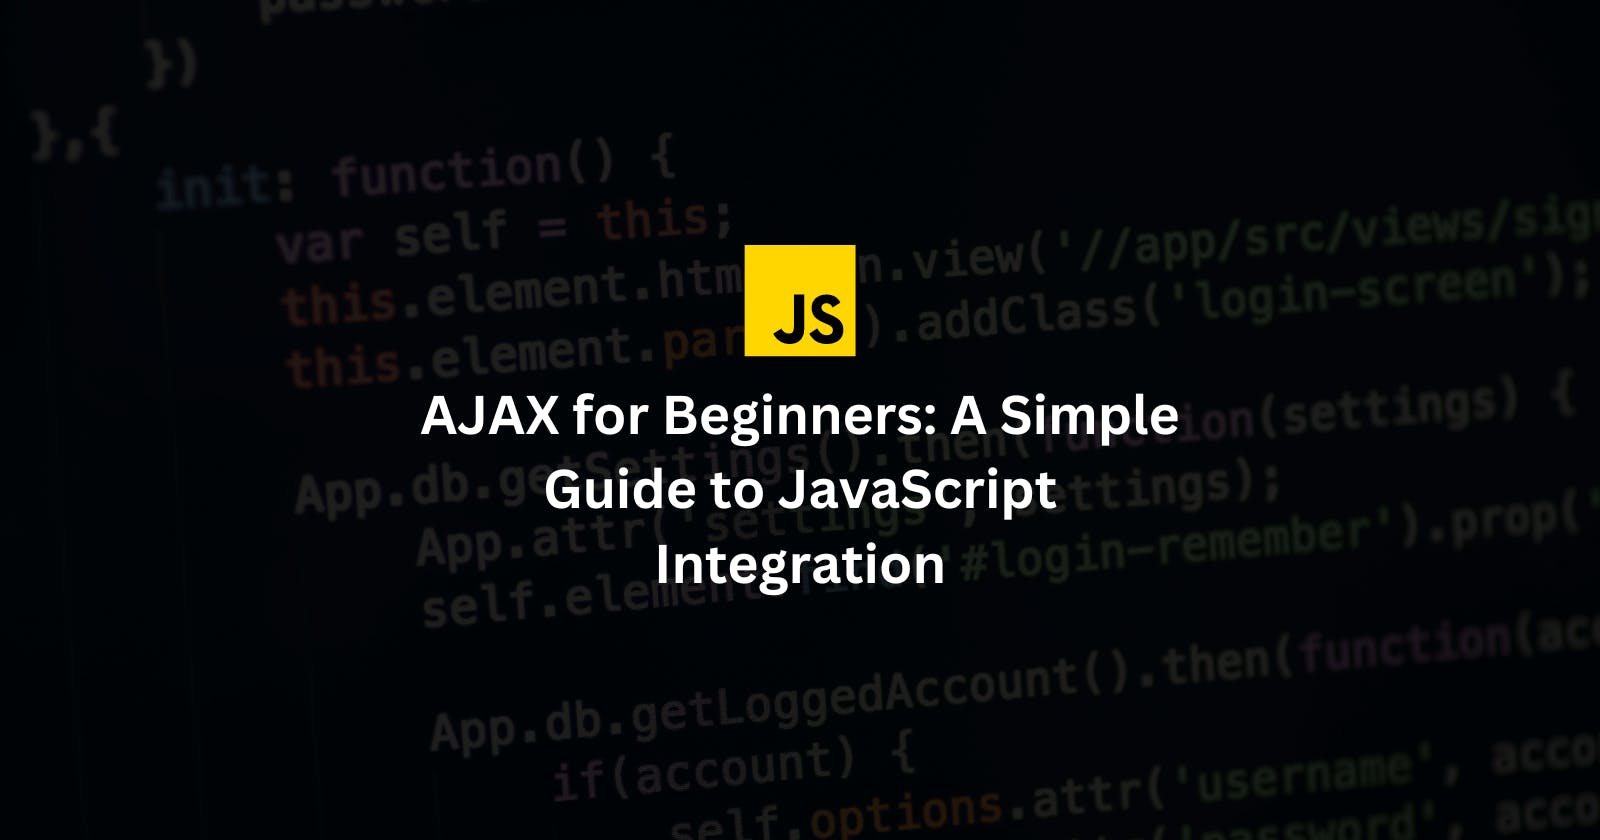 AJAX for Beginners: A Simple Guide to JavaScript Integration